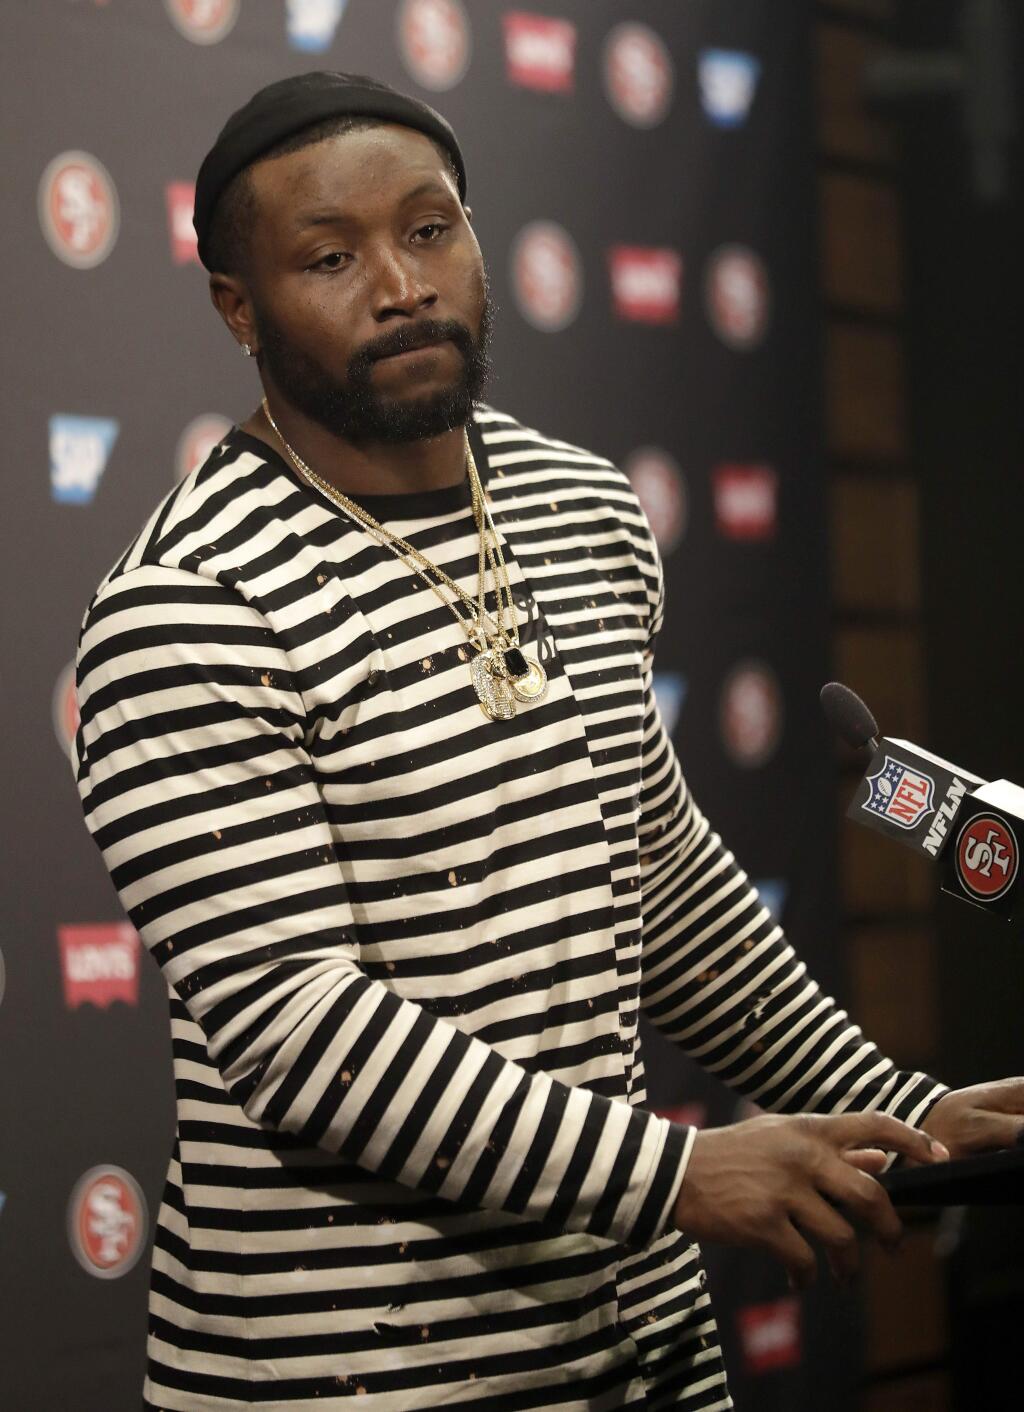 San Francisco 49ers linebacker NaVorro Bowman speaks at a news conference after a game against the Los Angeles Rams in Santa Clara, Monday, Sept. 12, 2016. (AP Photo/Marcio Jose Sanchez)